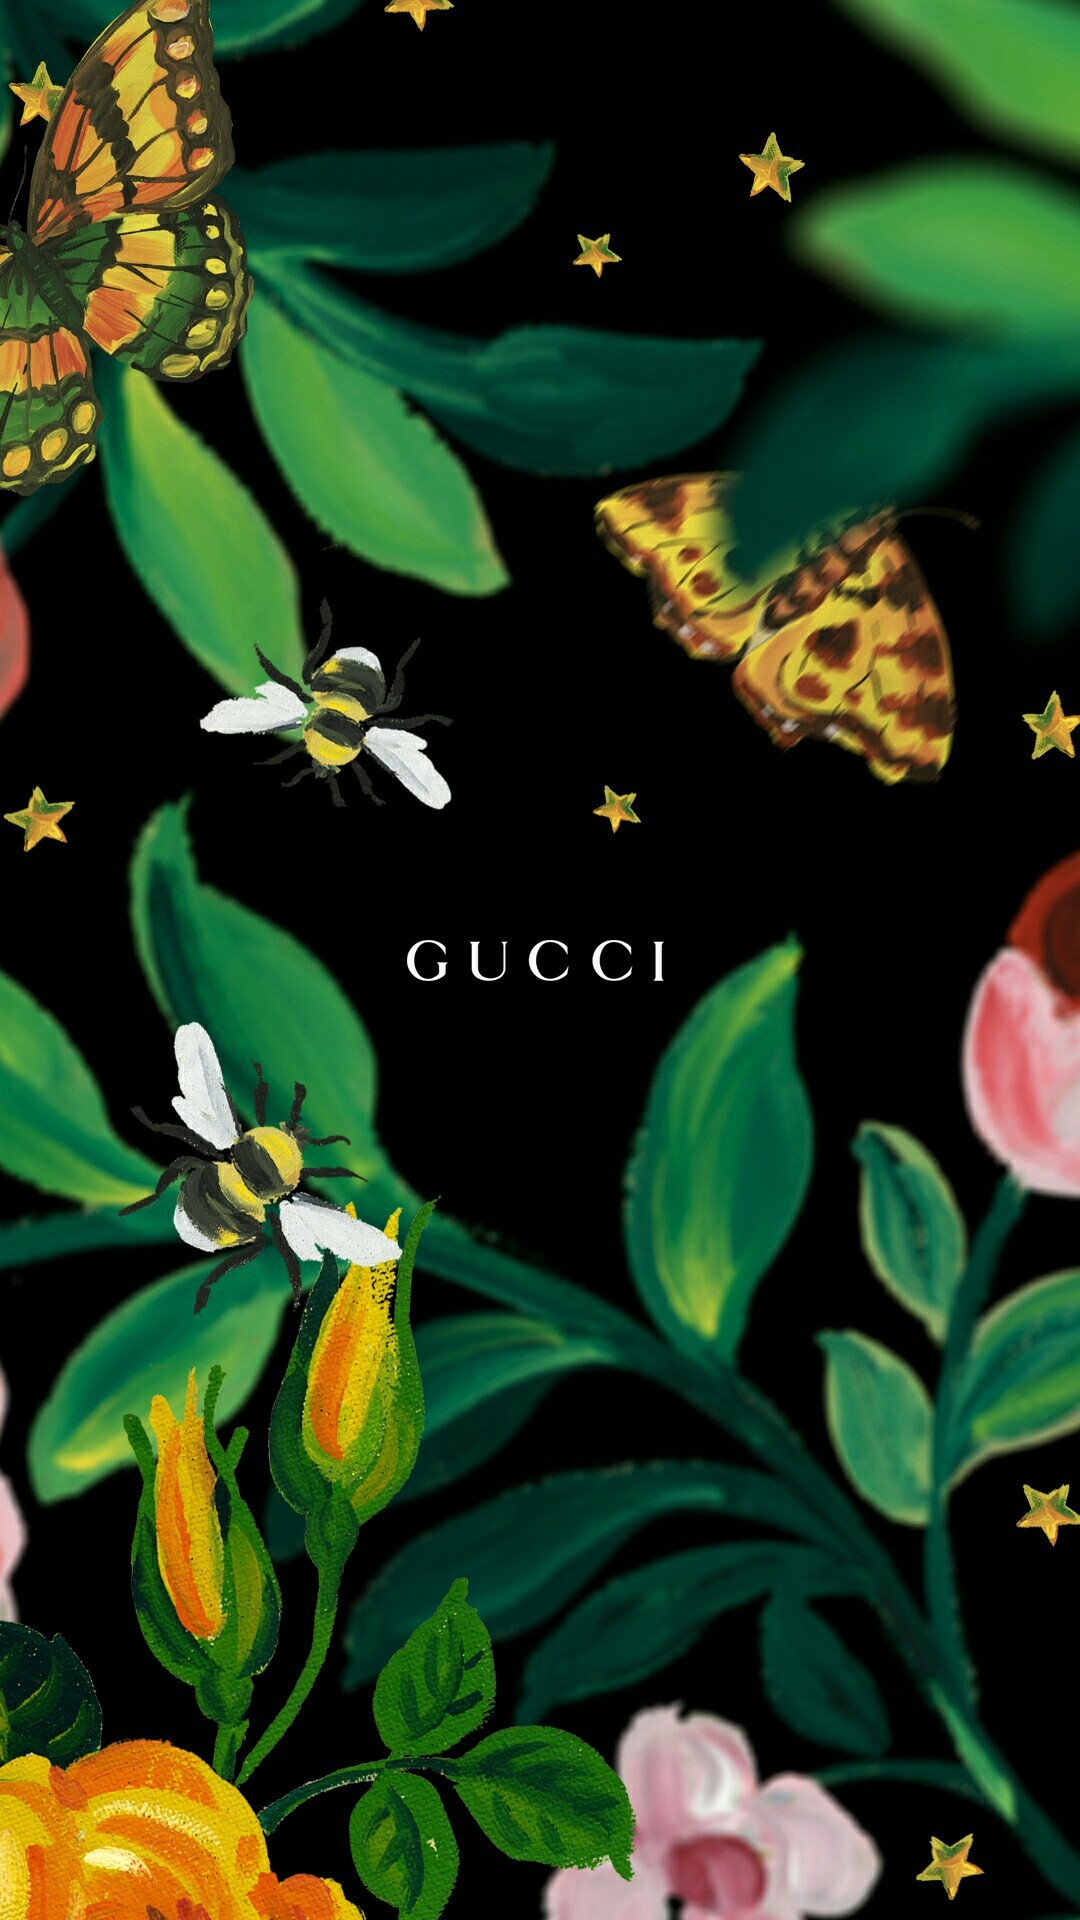 1080x1920 Gucci Wallpaper Wallpapers) – Wallpapers and Backgrounds